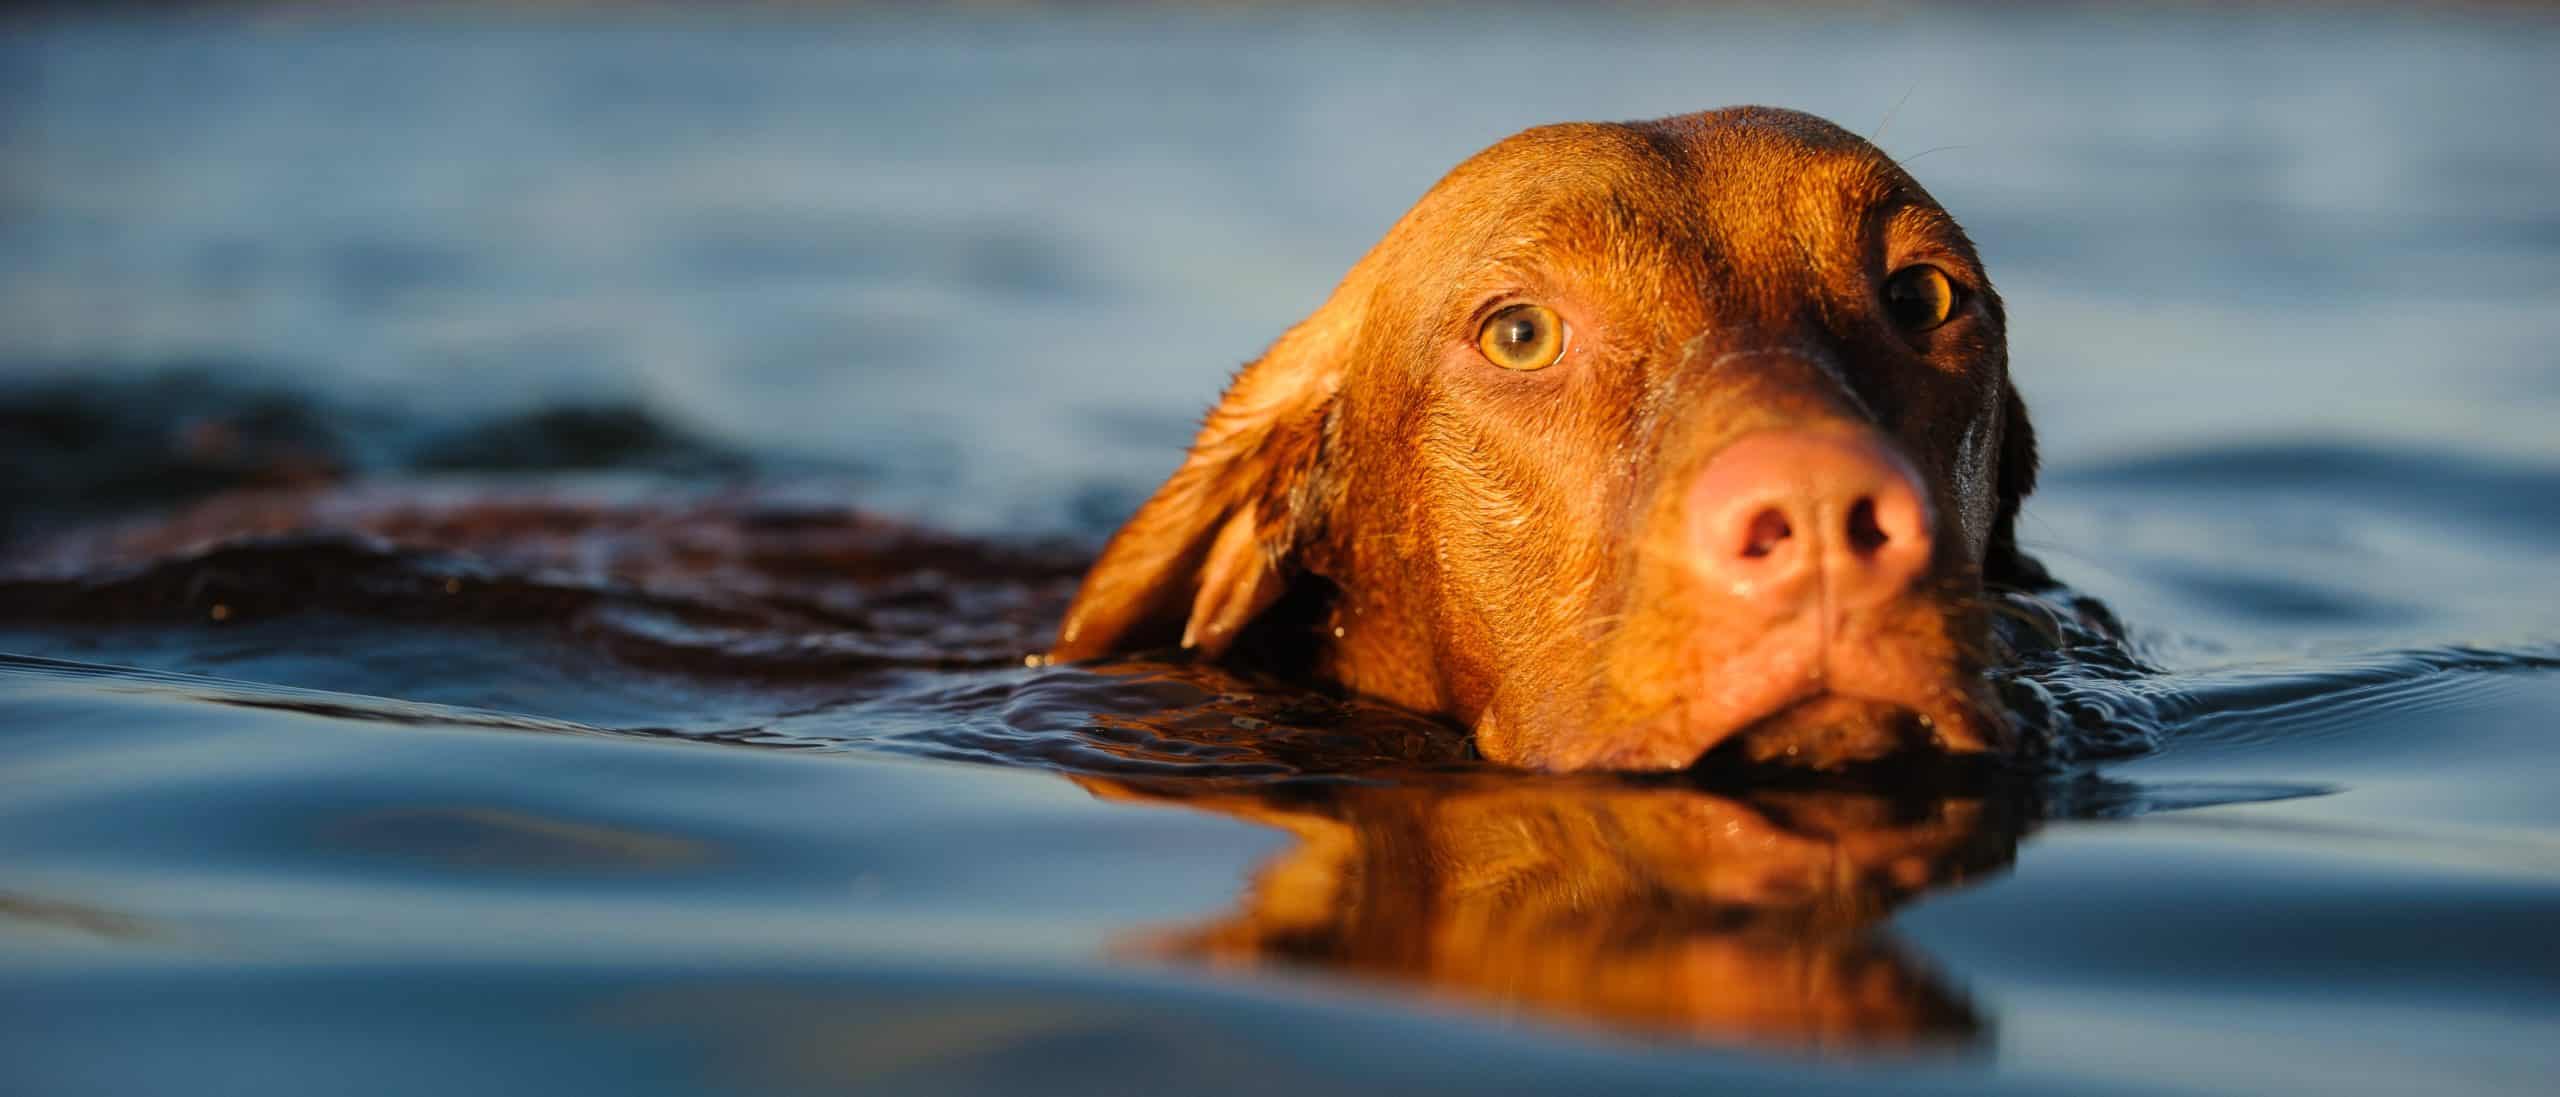 Vizsla swims in lake. One of the most active dog breeds, Vizslas have a near-bottomless appetite for exercise.